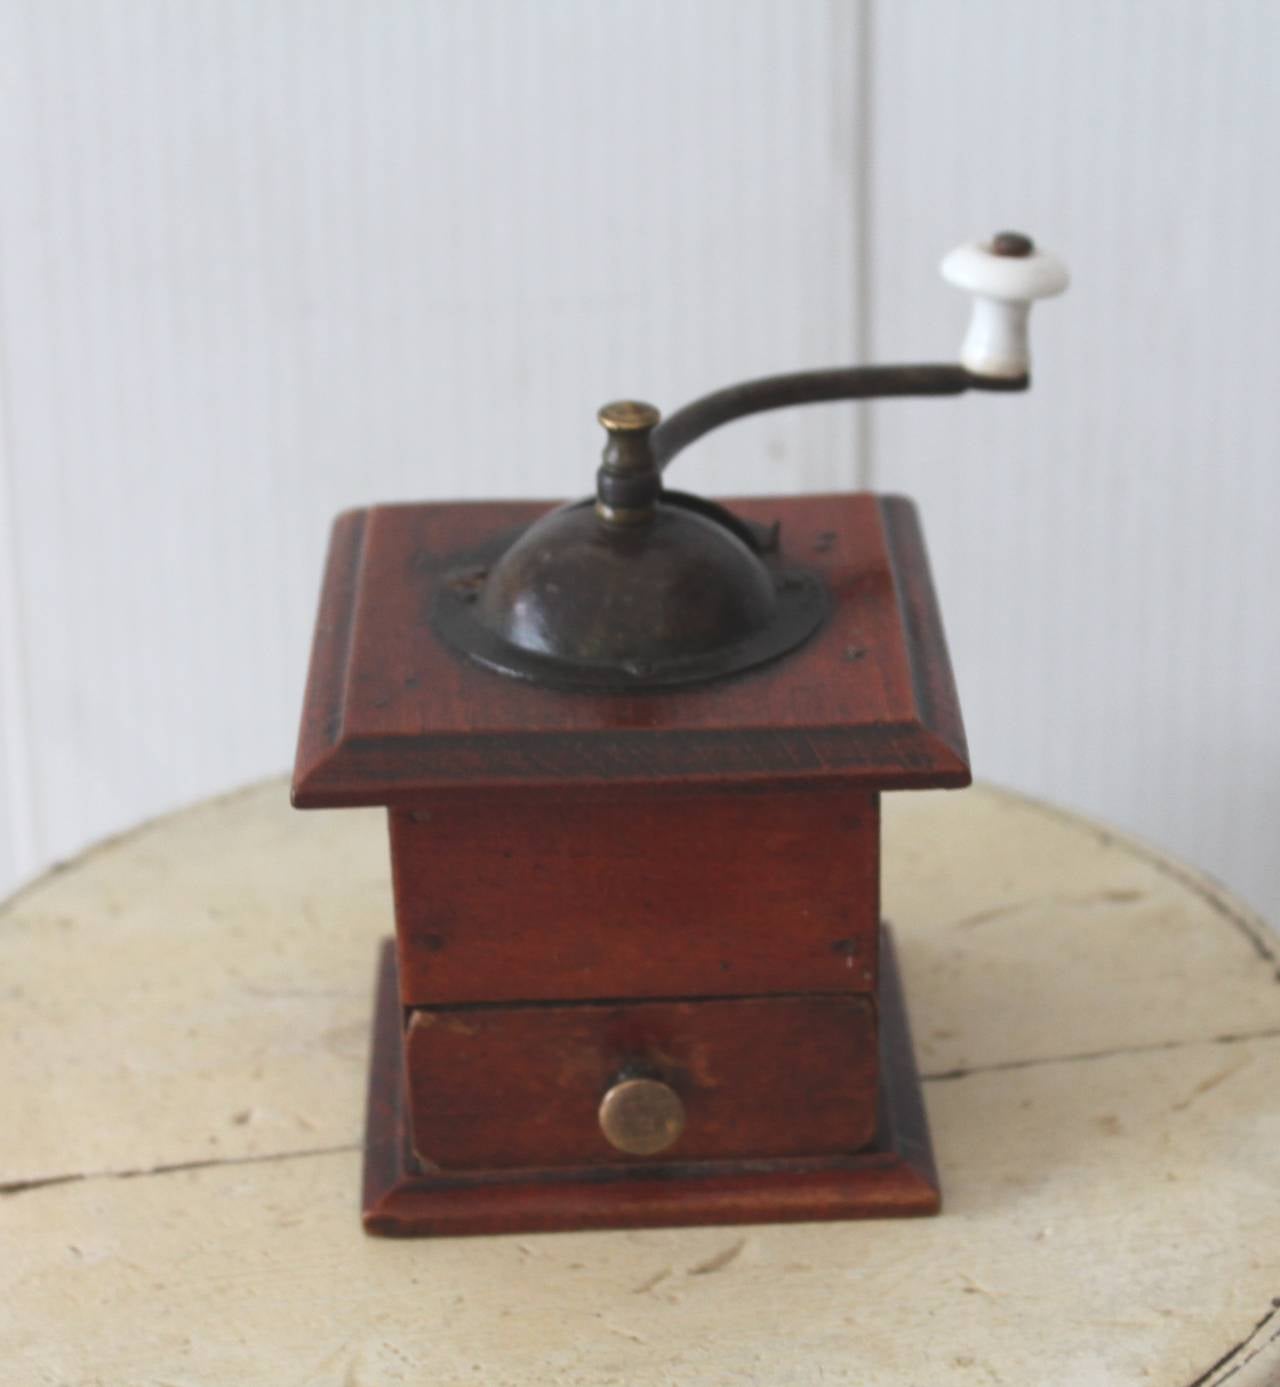 This finely constructed miniature 19th century coffee grinder has all original hardware and early pin nailed construction. The drawer pull is a brass Shaker Style pull with a iron stone knob on grinder handle. Condition is pristine.